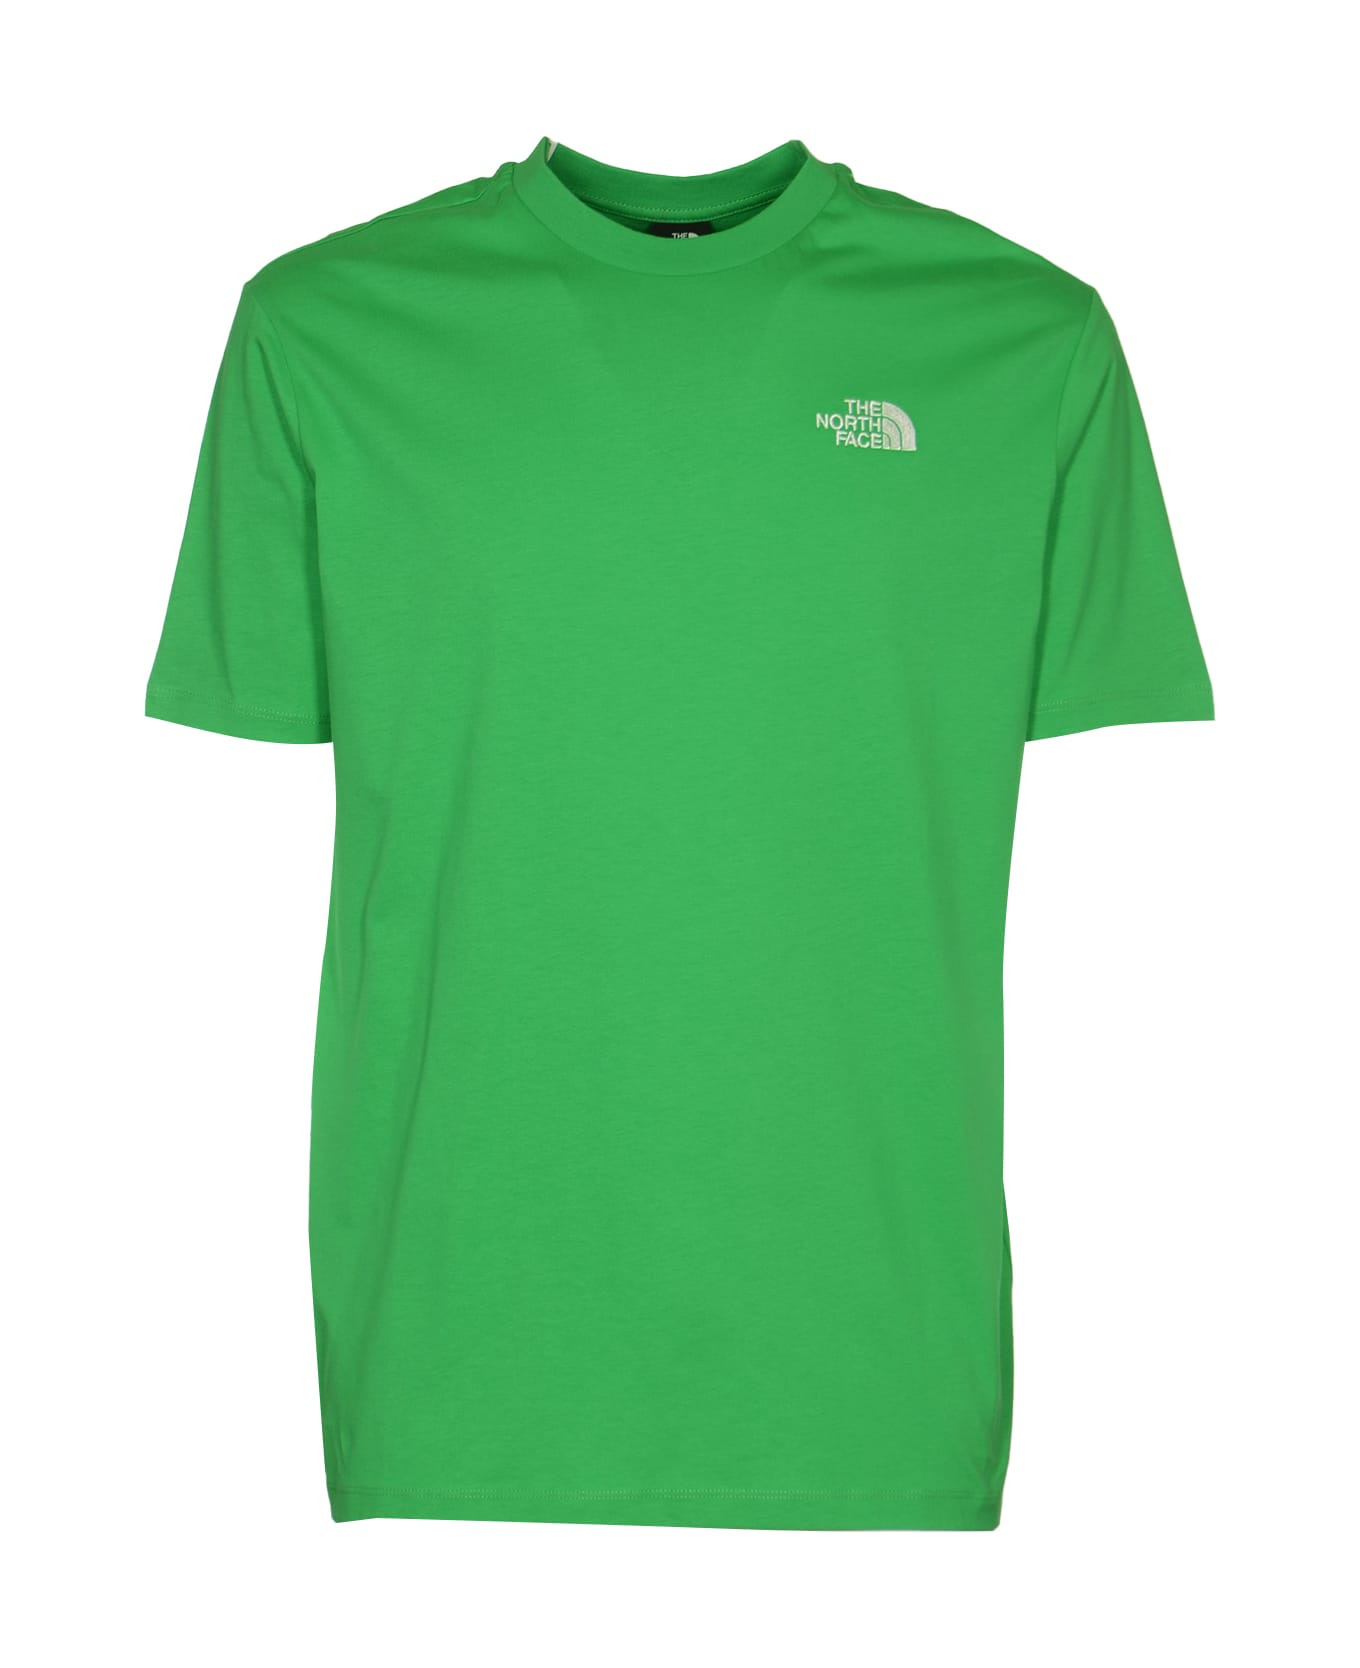 The North Face Essential Oversize T-shirt - Optic Emerald Tシャツ